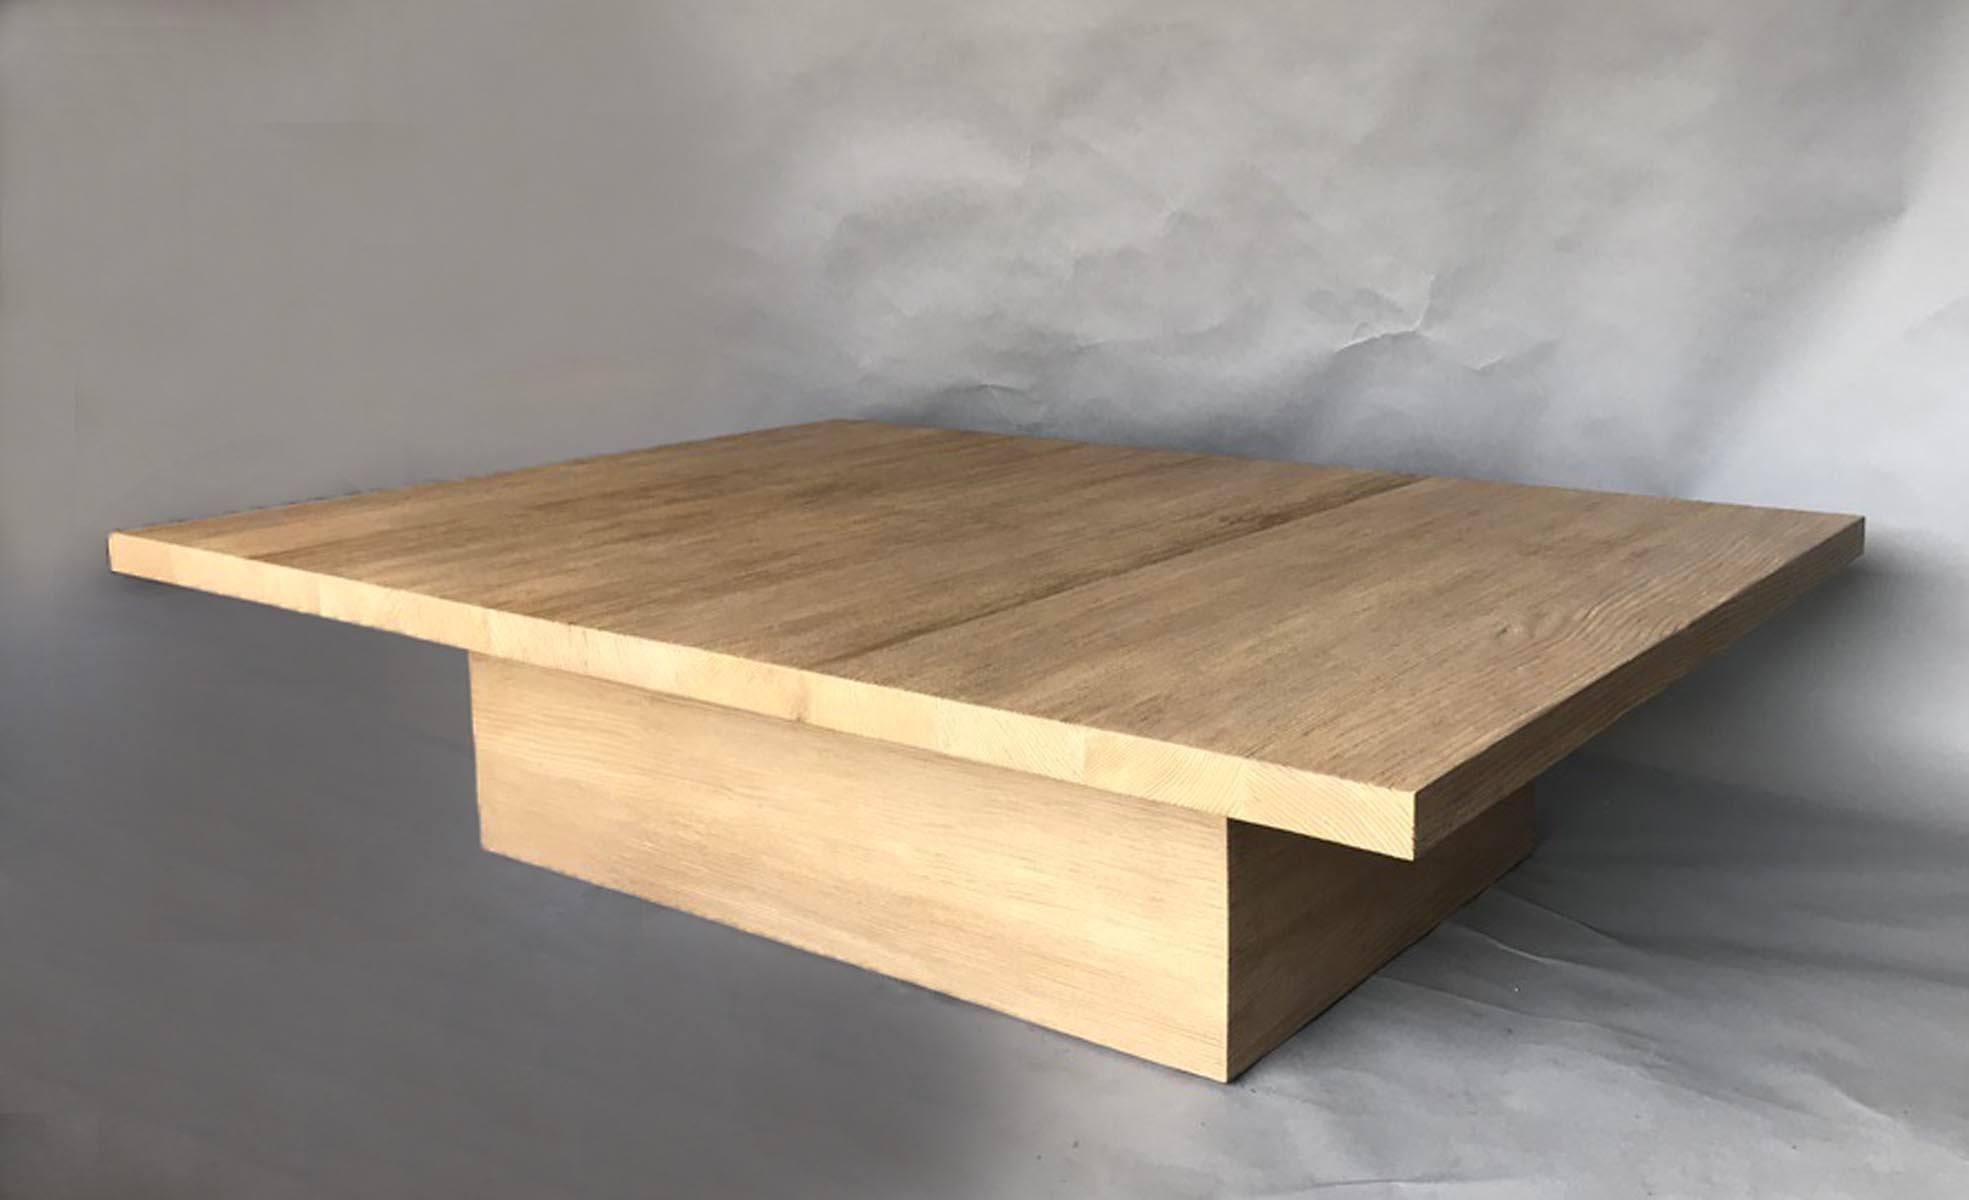 Custom  Douglas fir coffee table with cube base. Can be made in custom sizes and finishes. As seen here in open grain and light latte. Made in Los Angeles.
DUE TO CHANGING PRICES OF WOOD AND LABOR, CUSTOM PRICES ARE SUBJECT TO CHANGE. PLEASE INQUIRE